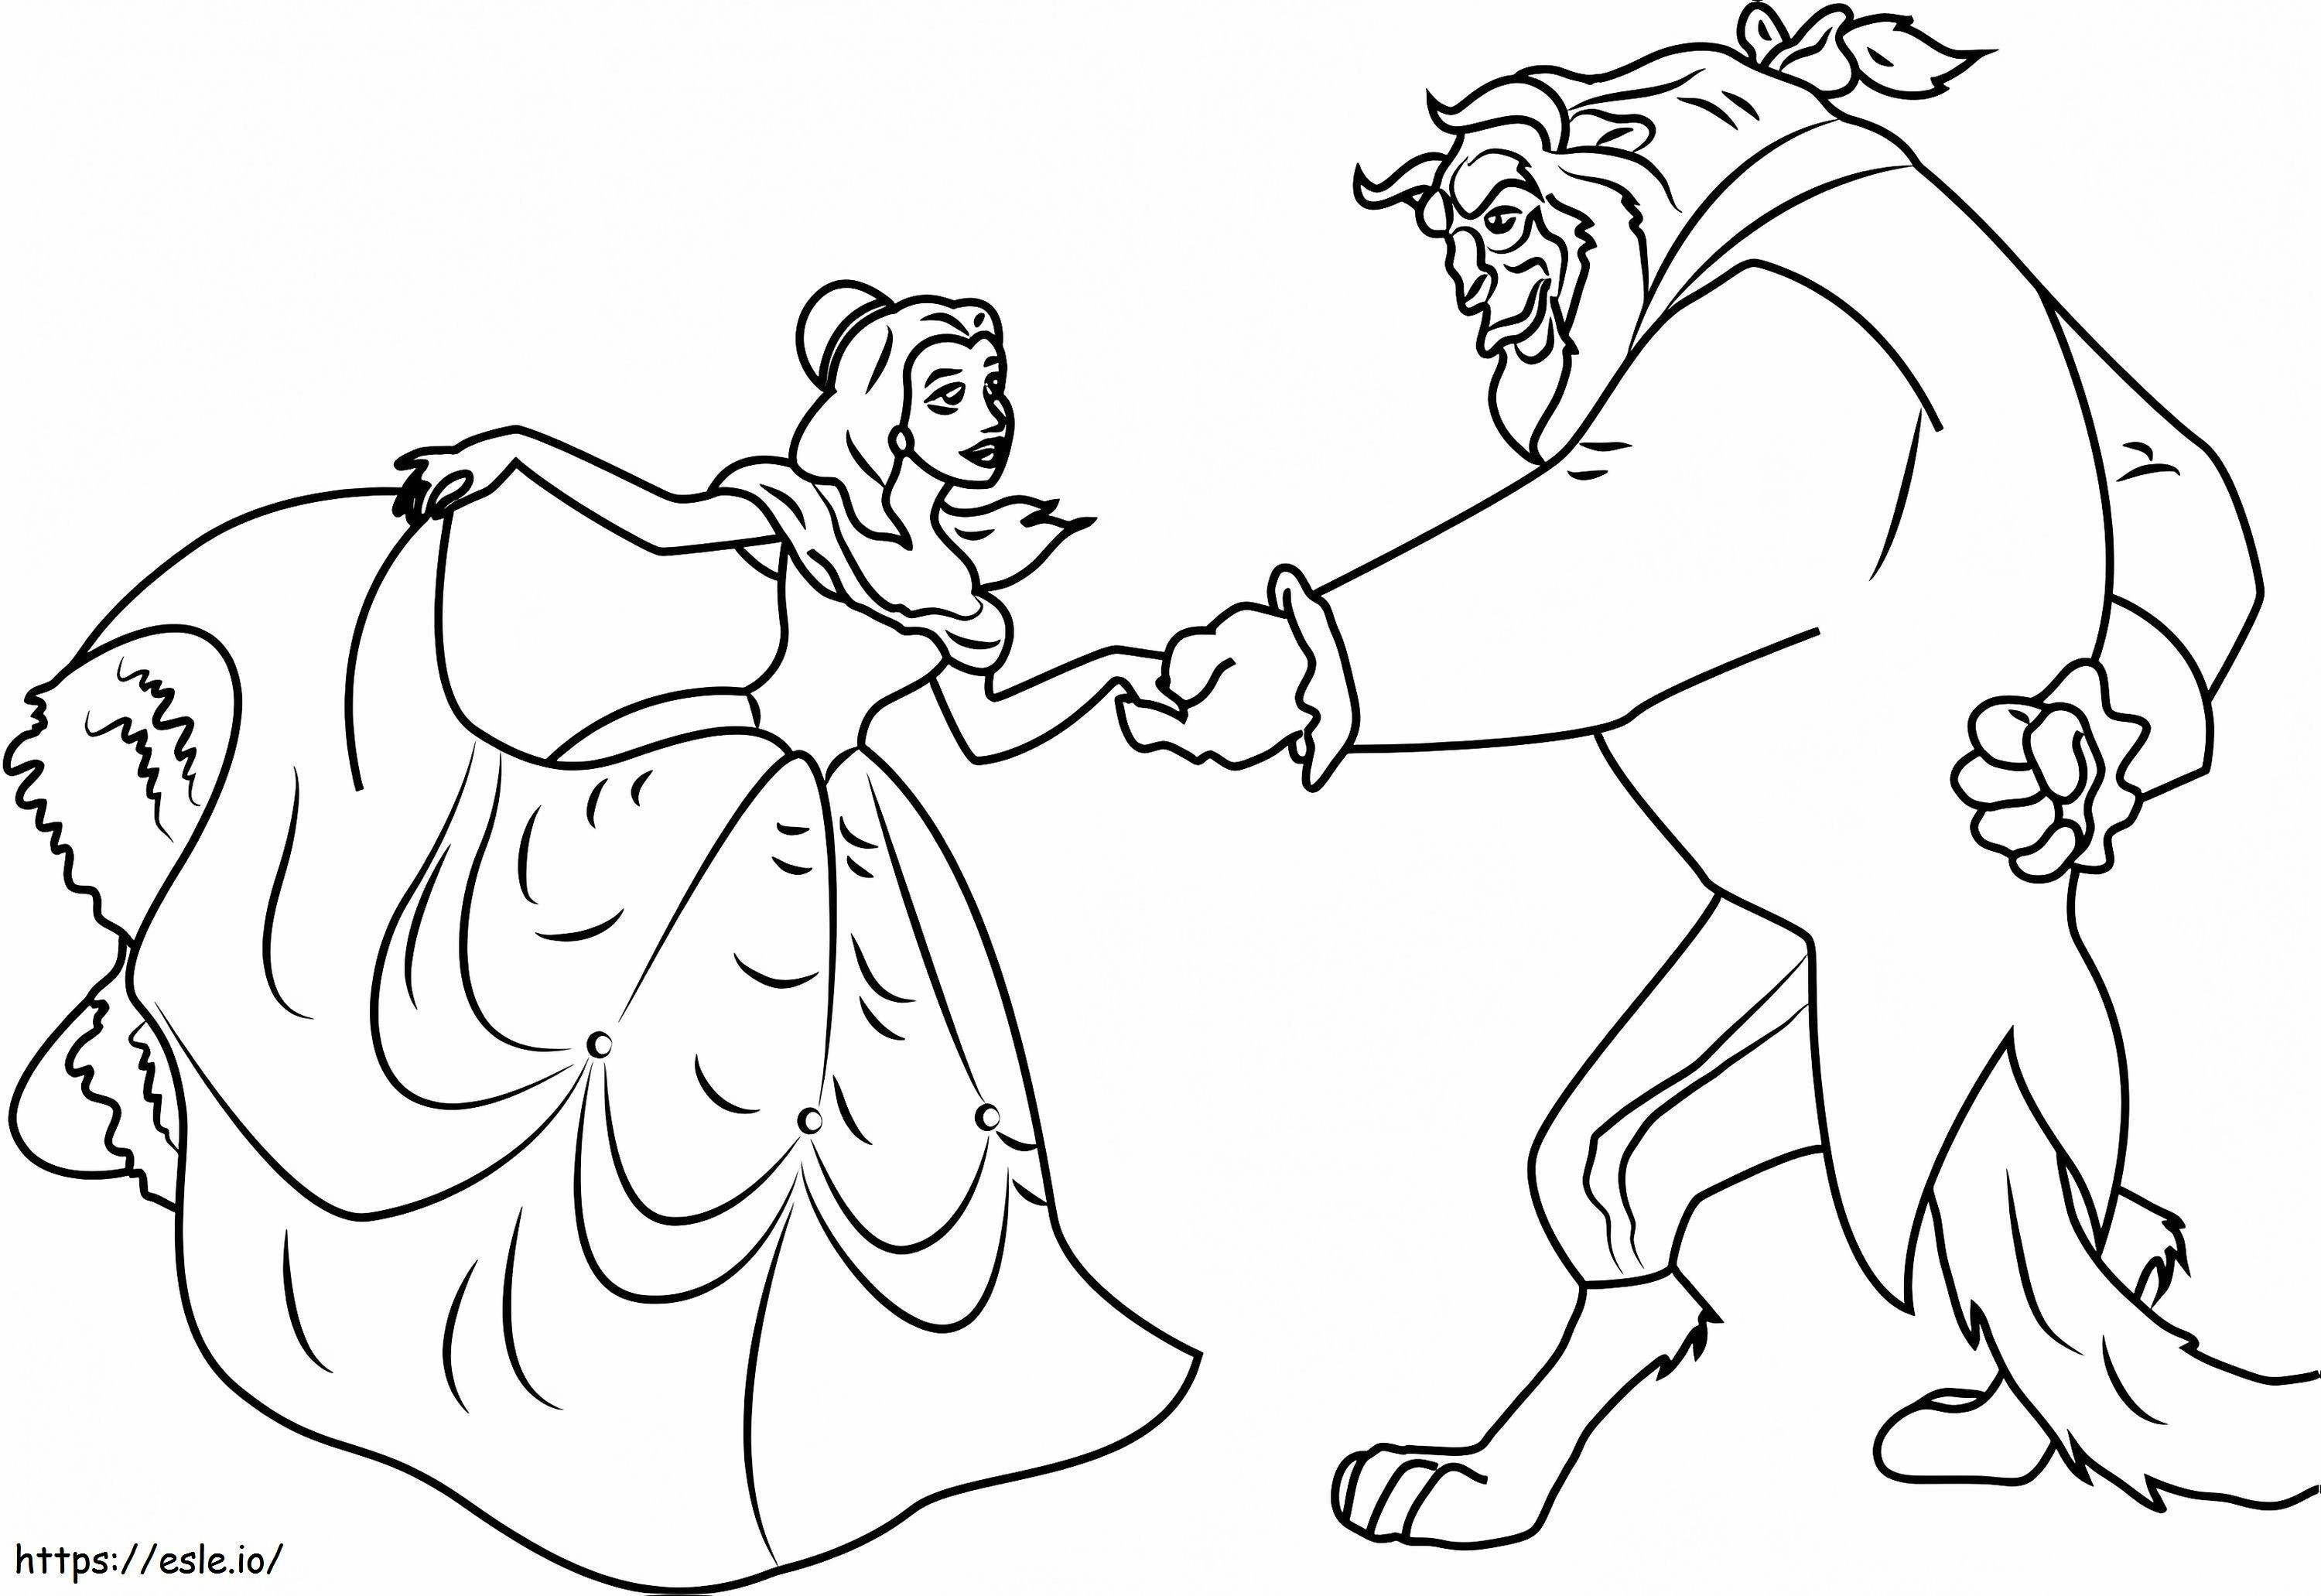 1532309578 Bella And Beast Dancing A4 E1600338347825 coloring page